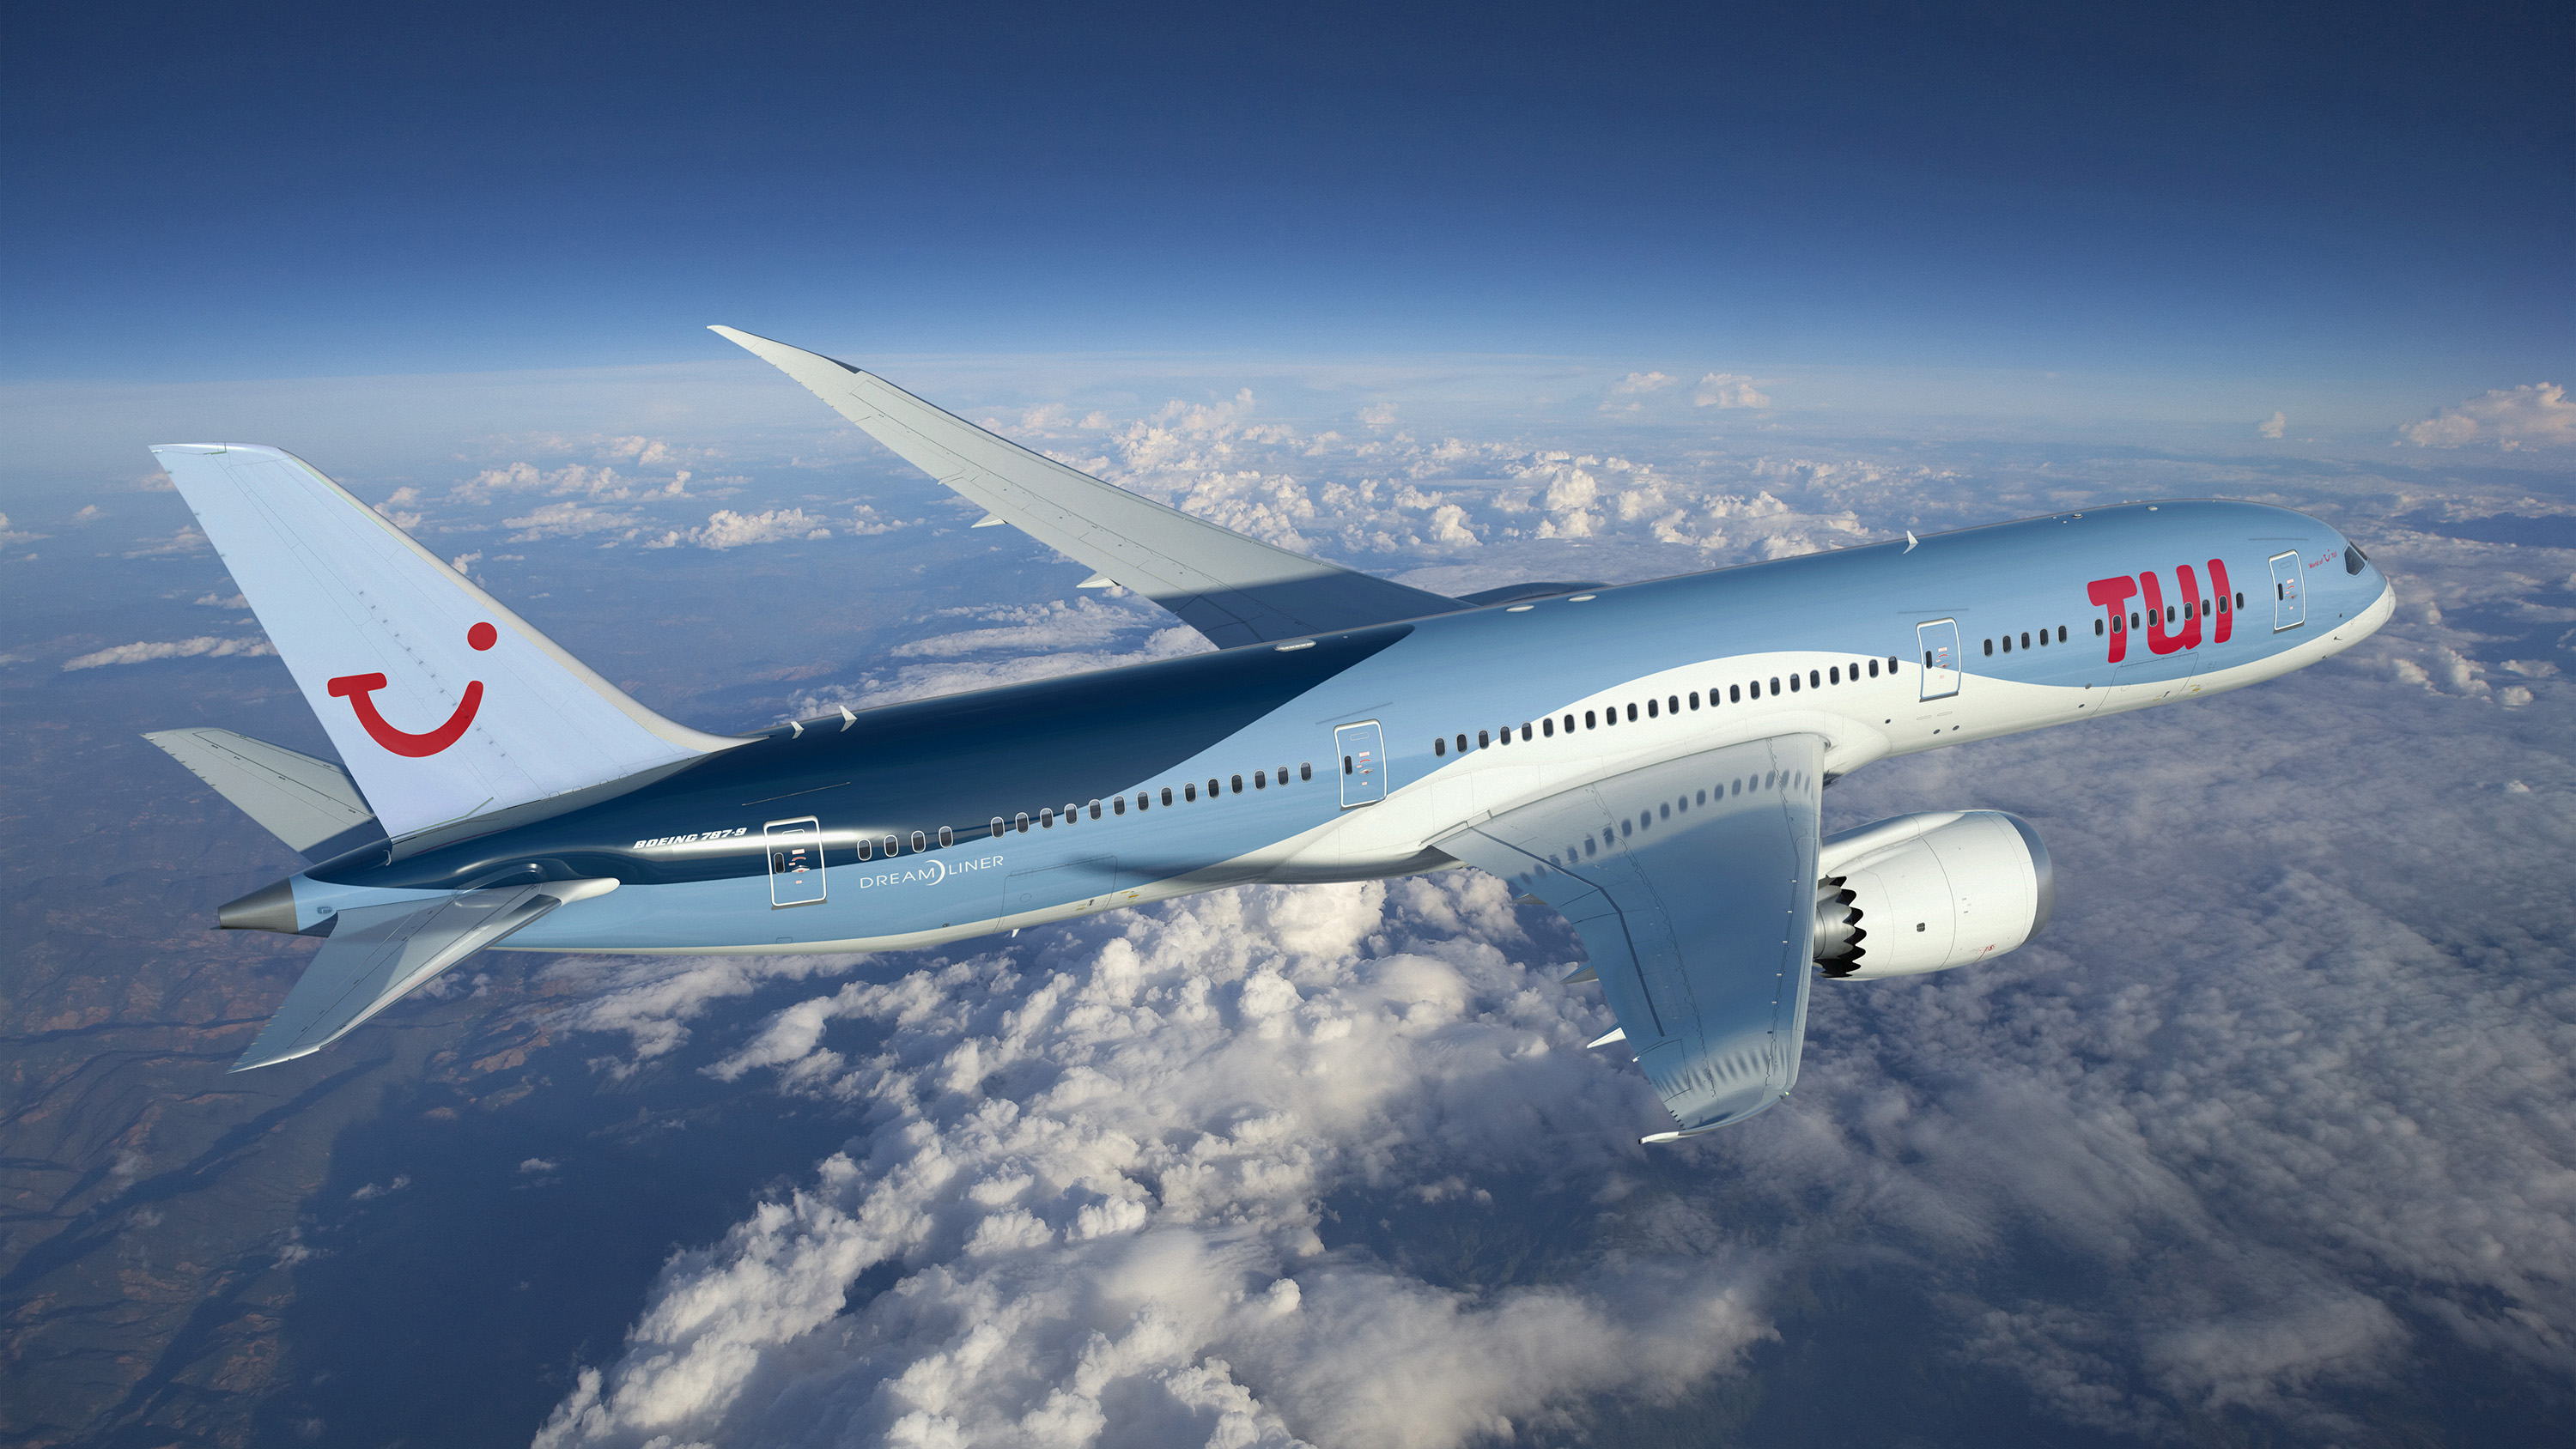 Boeing, Embraer to partner on environmental initiatives